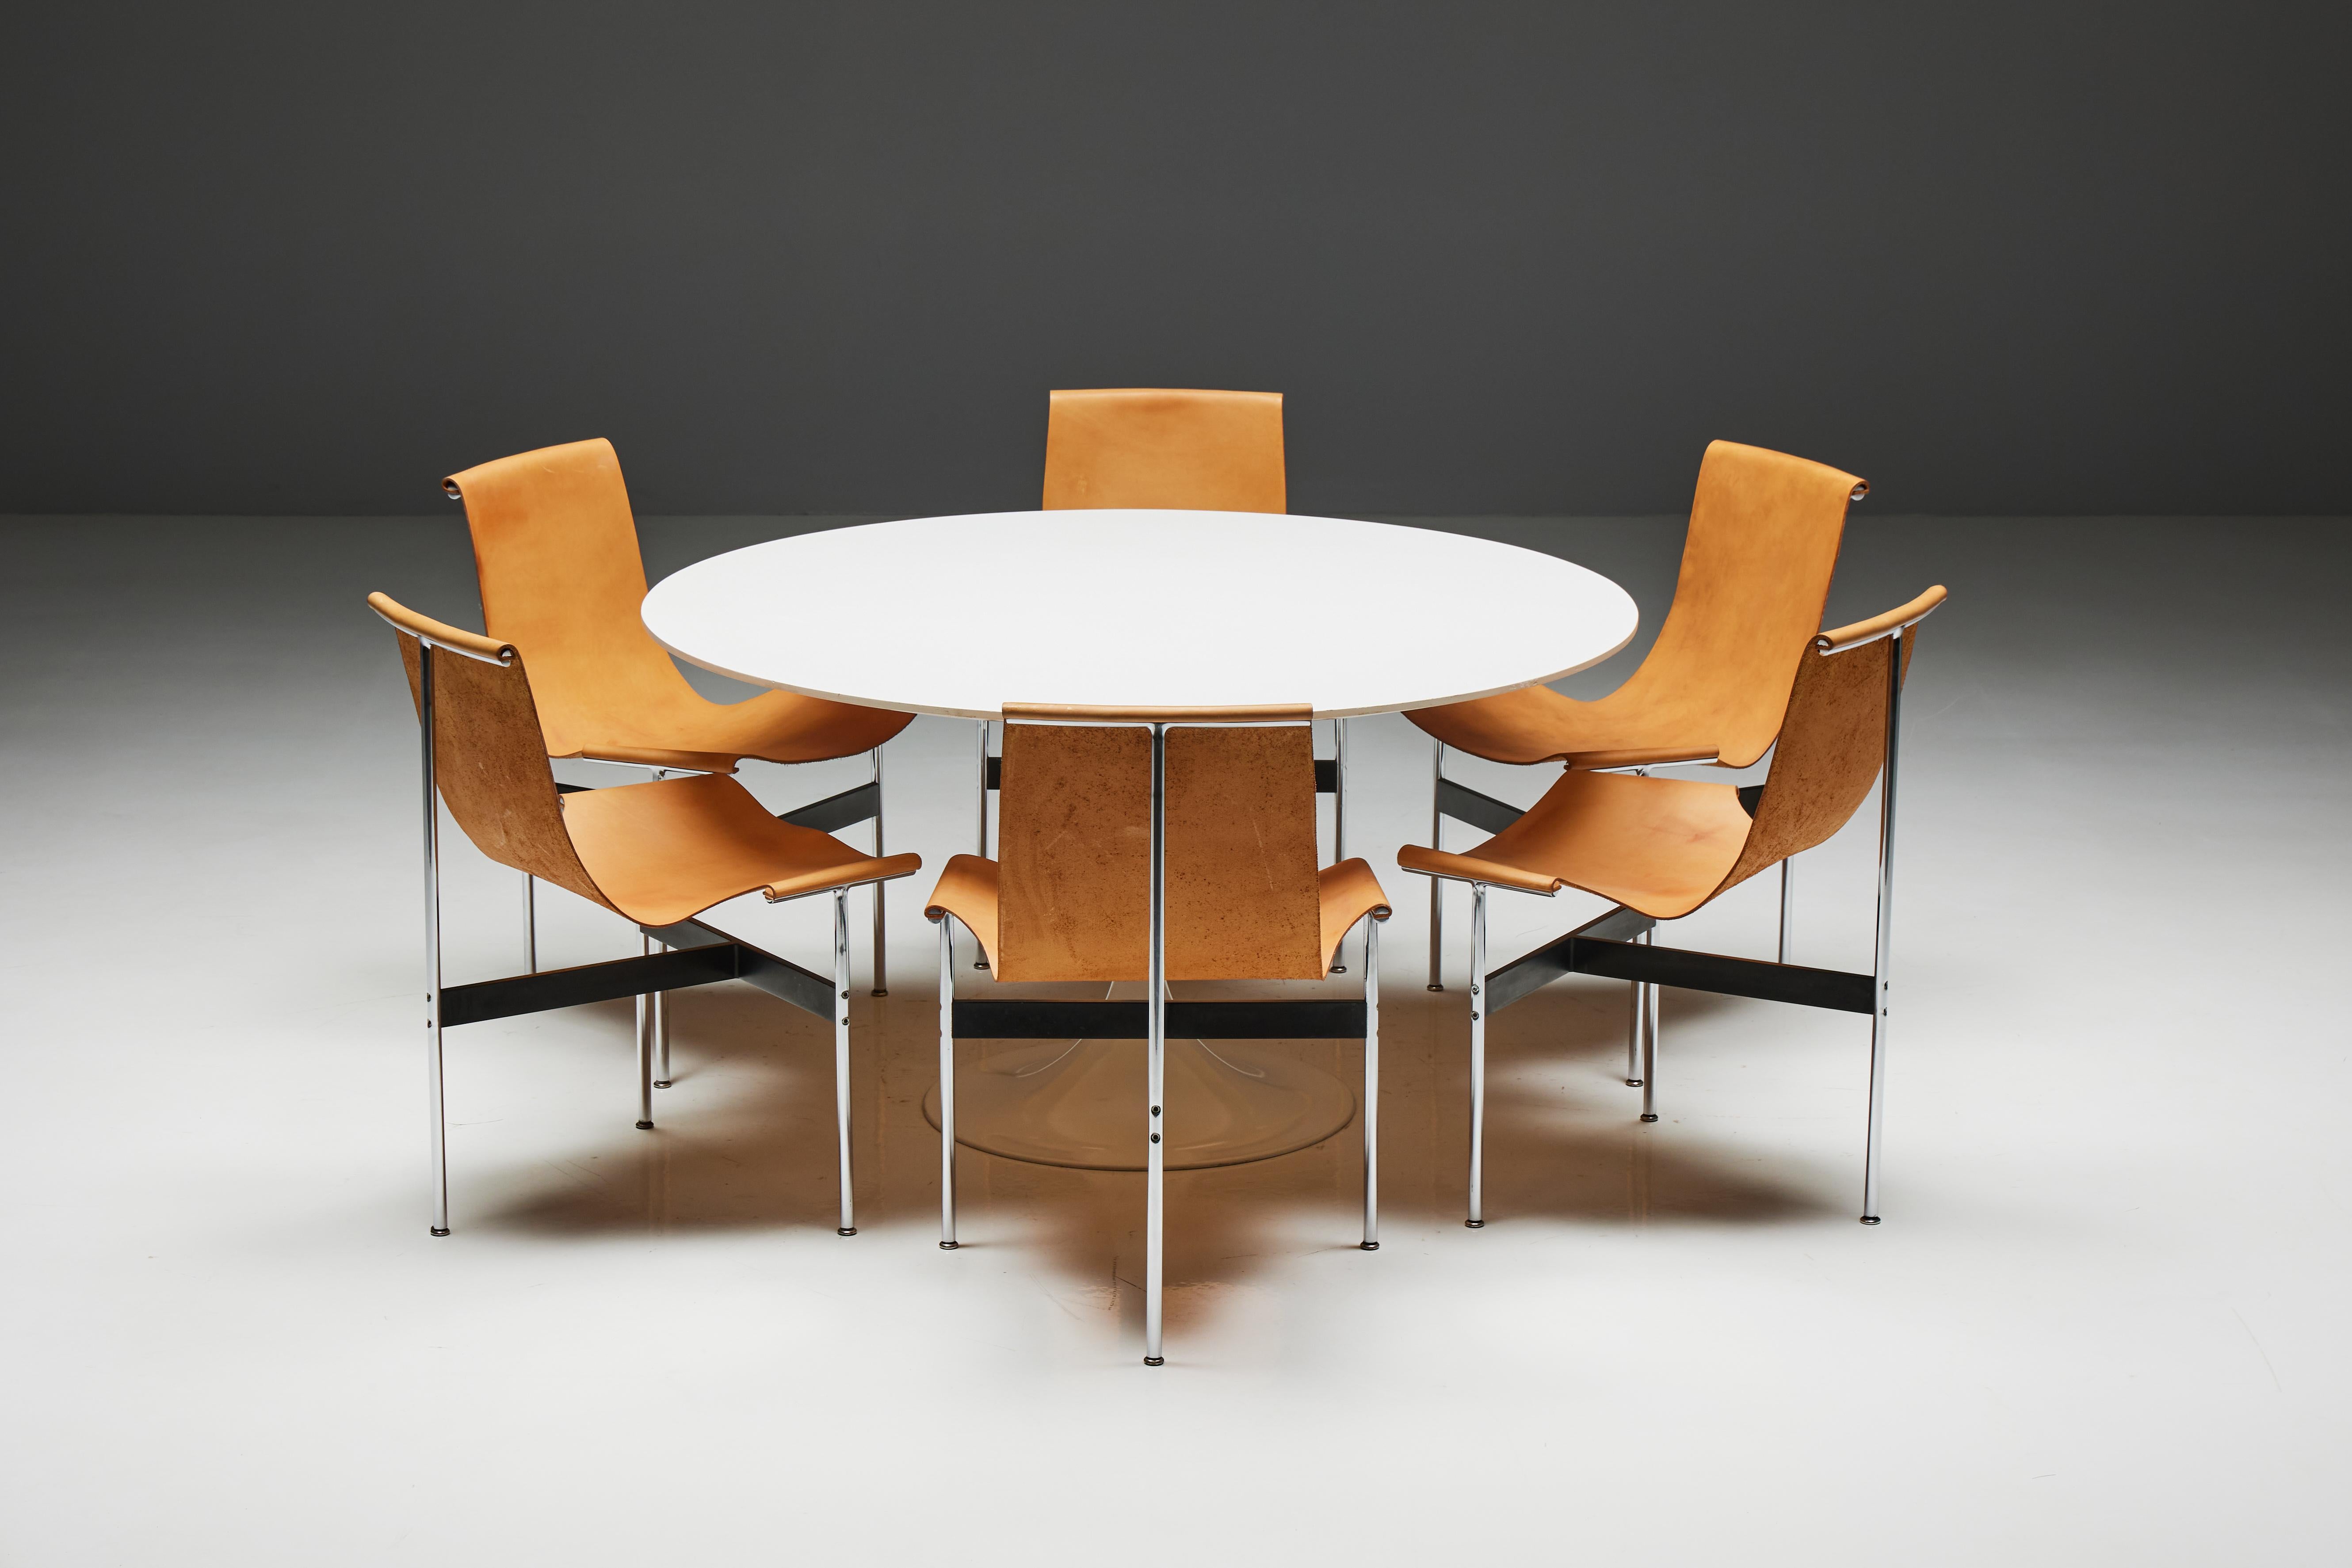 The ultimate mid-century modern ensemble: the T-chairs by Katavolos, Kelley, and Littell, accompanied by a round dining table by Eero Saarinen. Crafted in 1952, the T-chairs boast chrome-plated steel frames, cognac camel leather seats, and an iconic